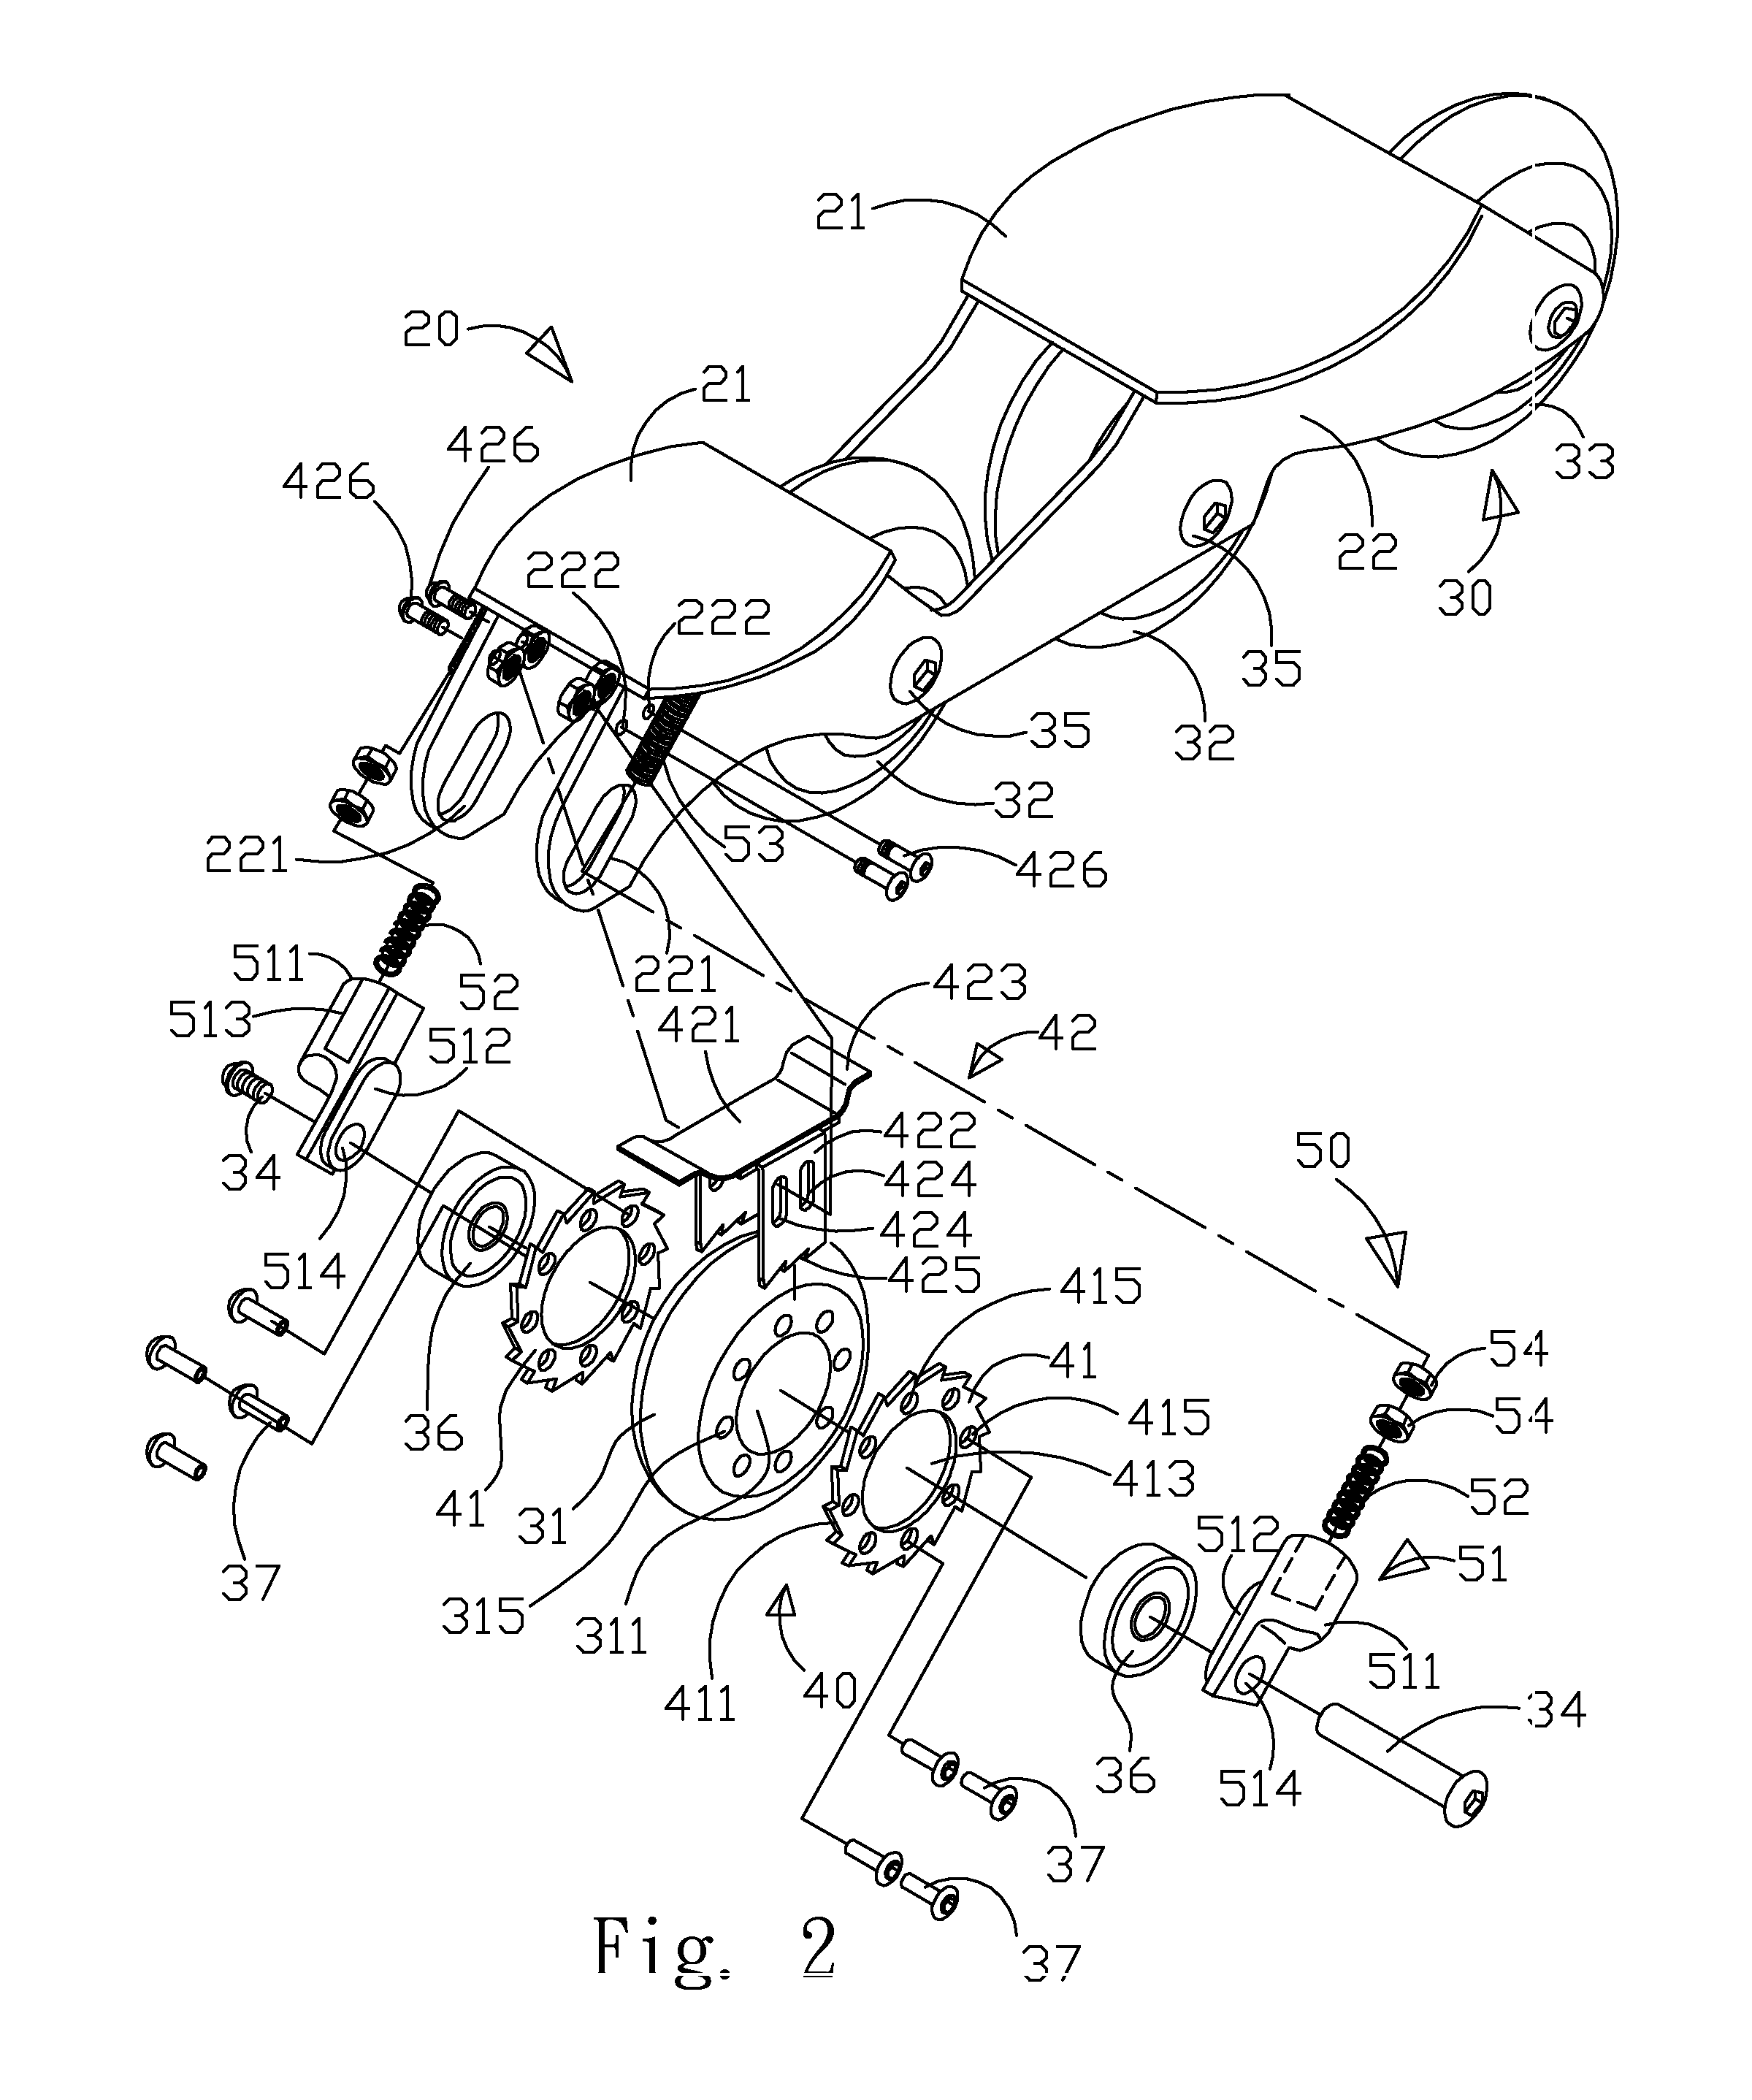 Structure of inline skates